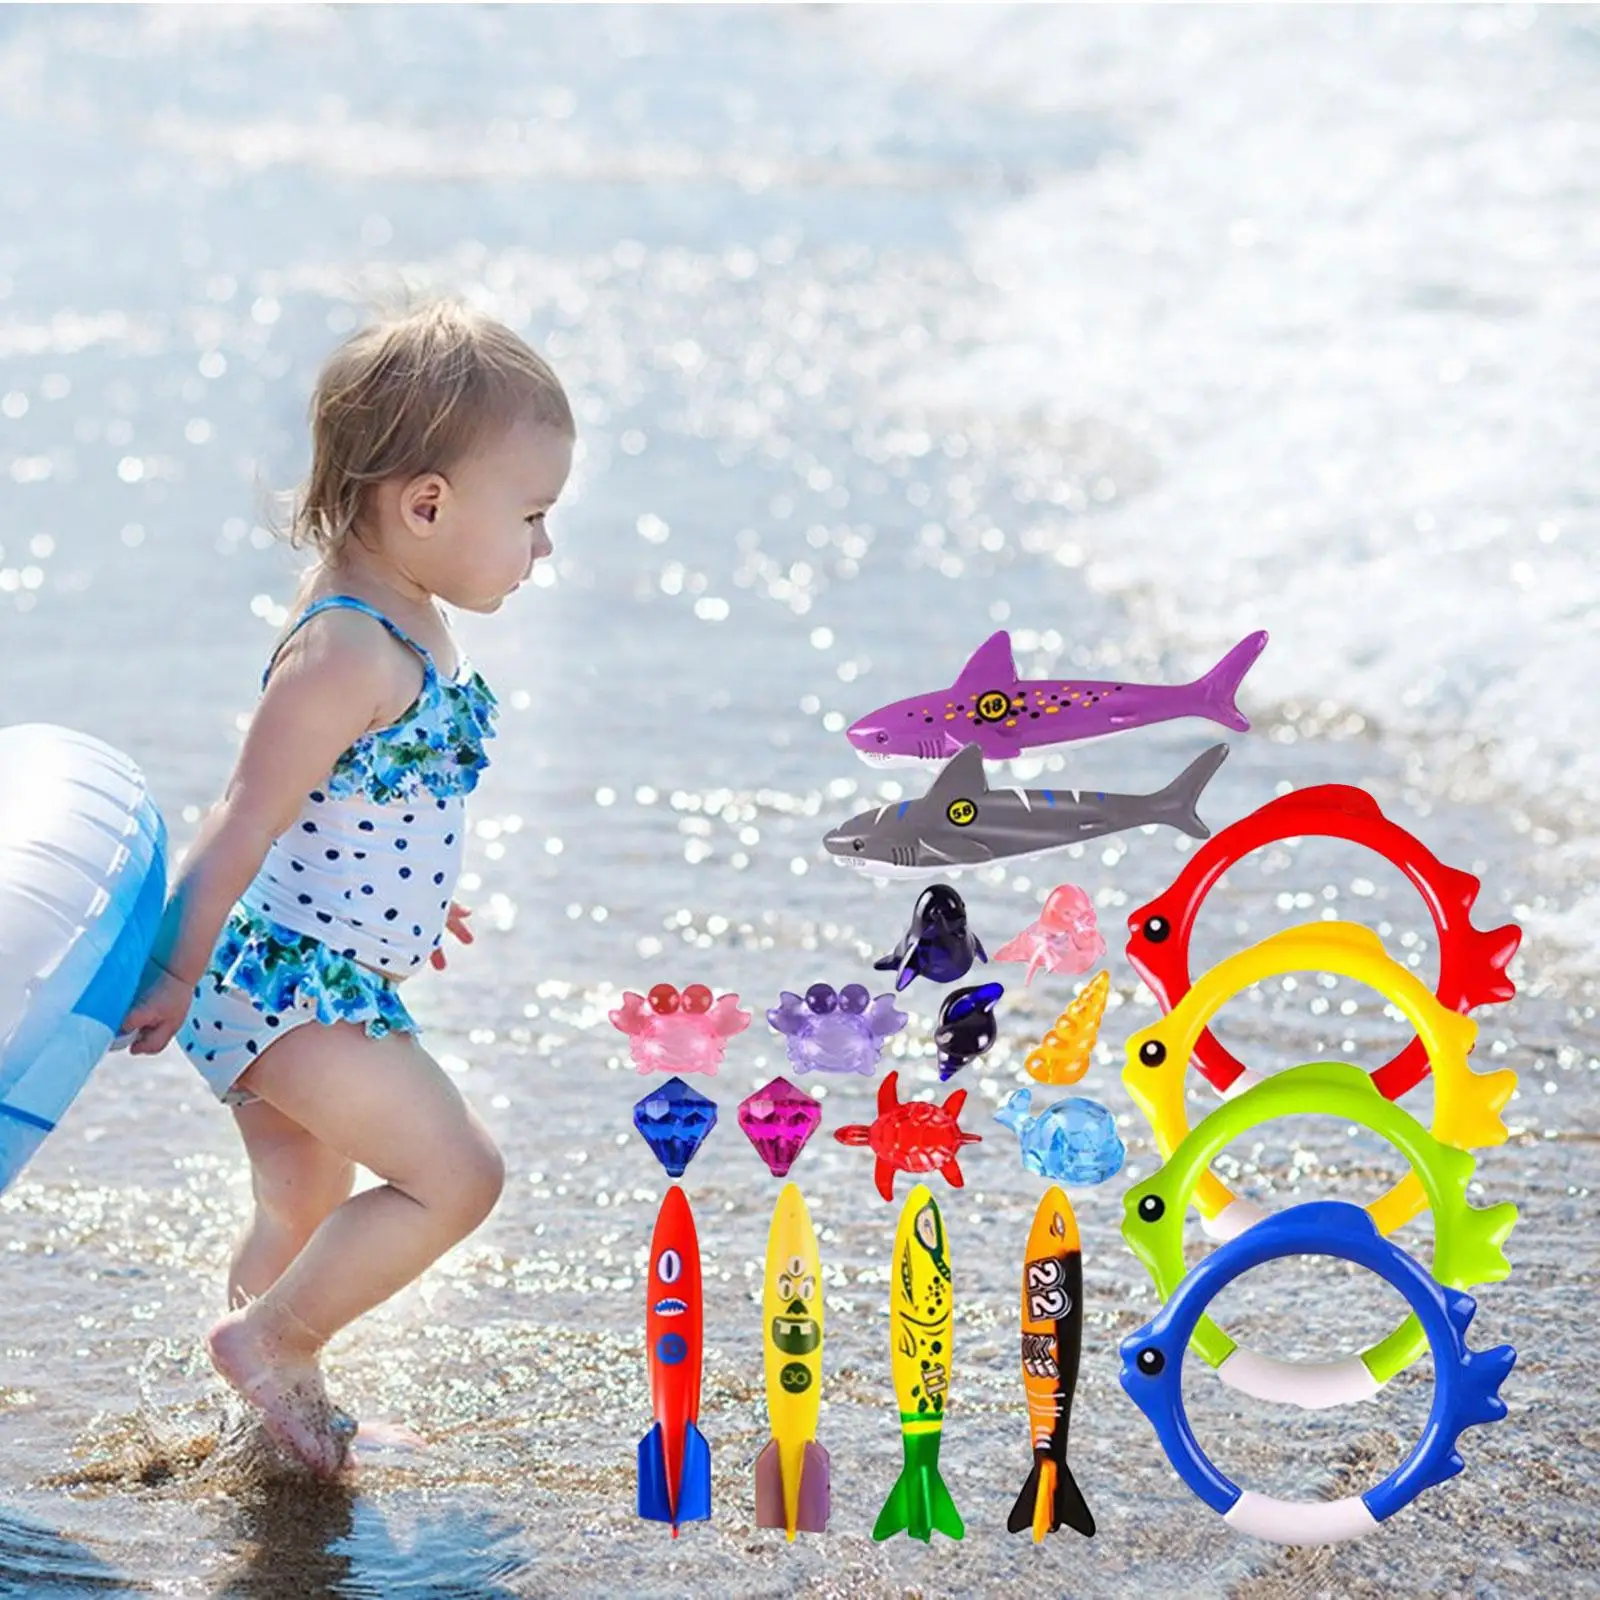 20 Pieces Fun Swim Games Sinking Set Party Favors Sea Animals Diving Toys Underwater Dive Gifts for Pool Kids Ages 3+